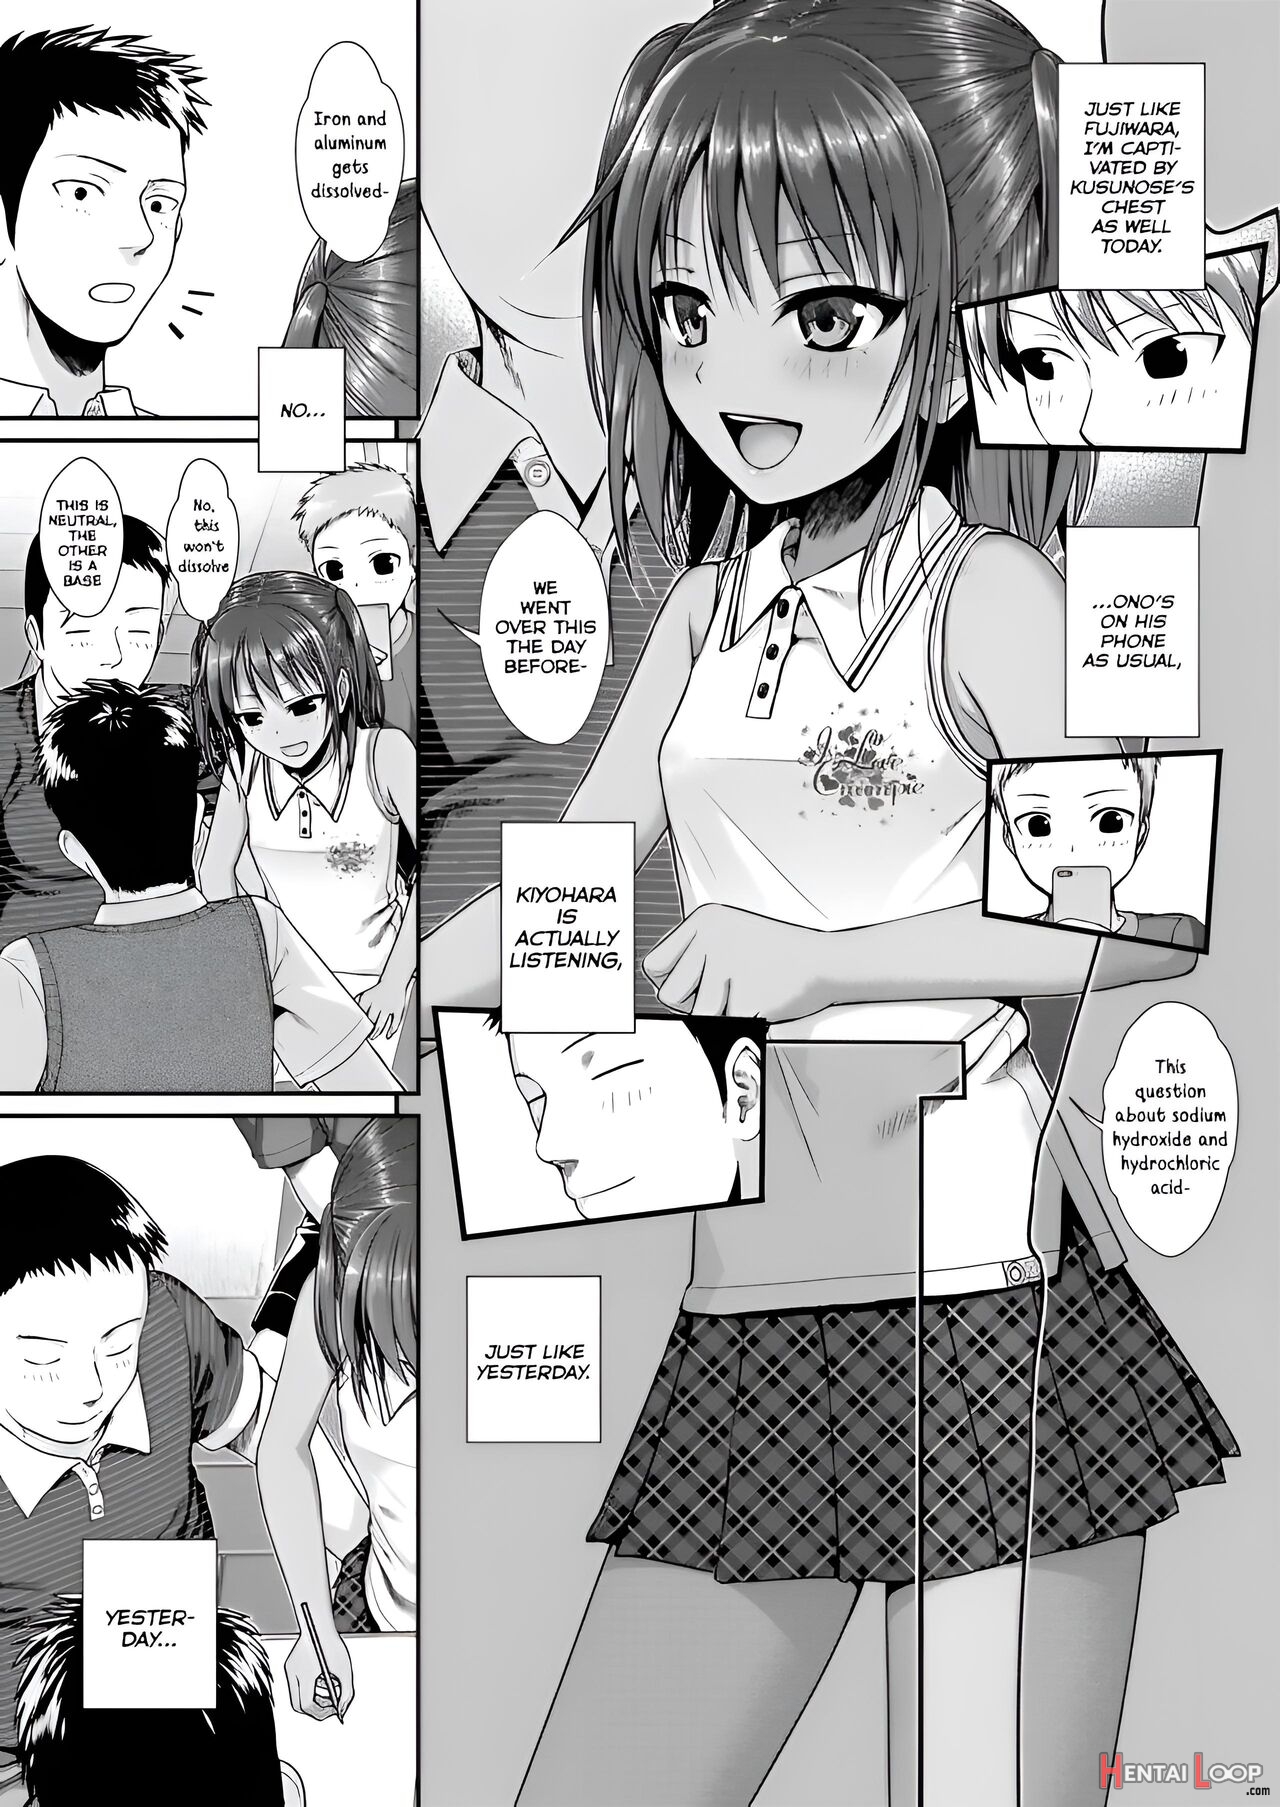 Together With Everyone After School 4k Edit page 9